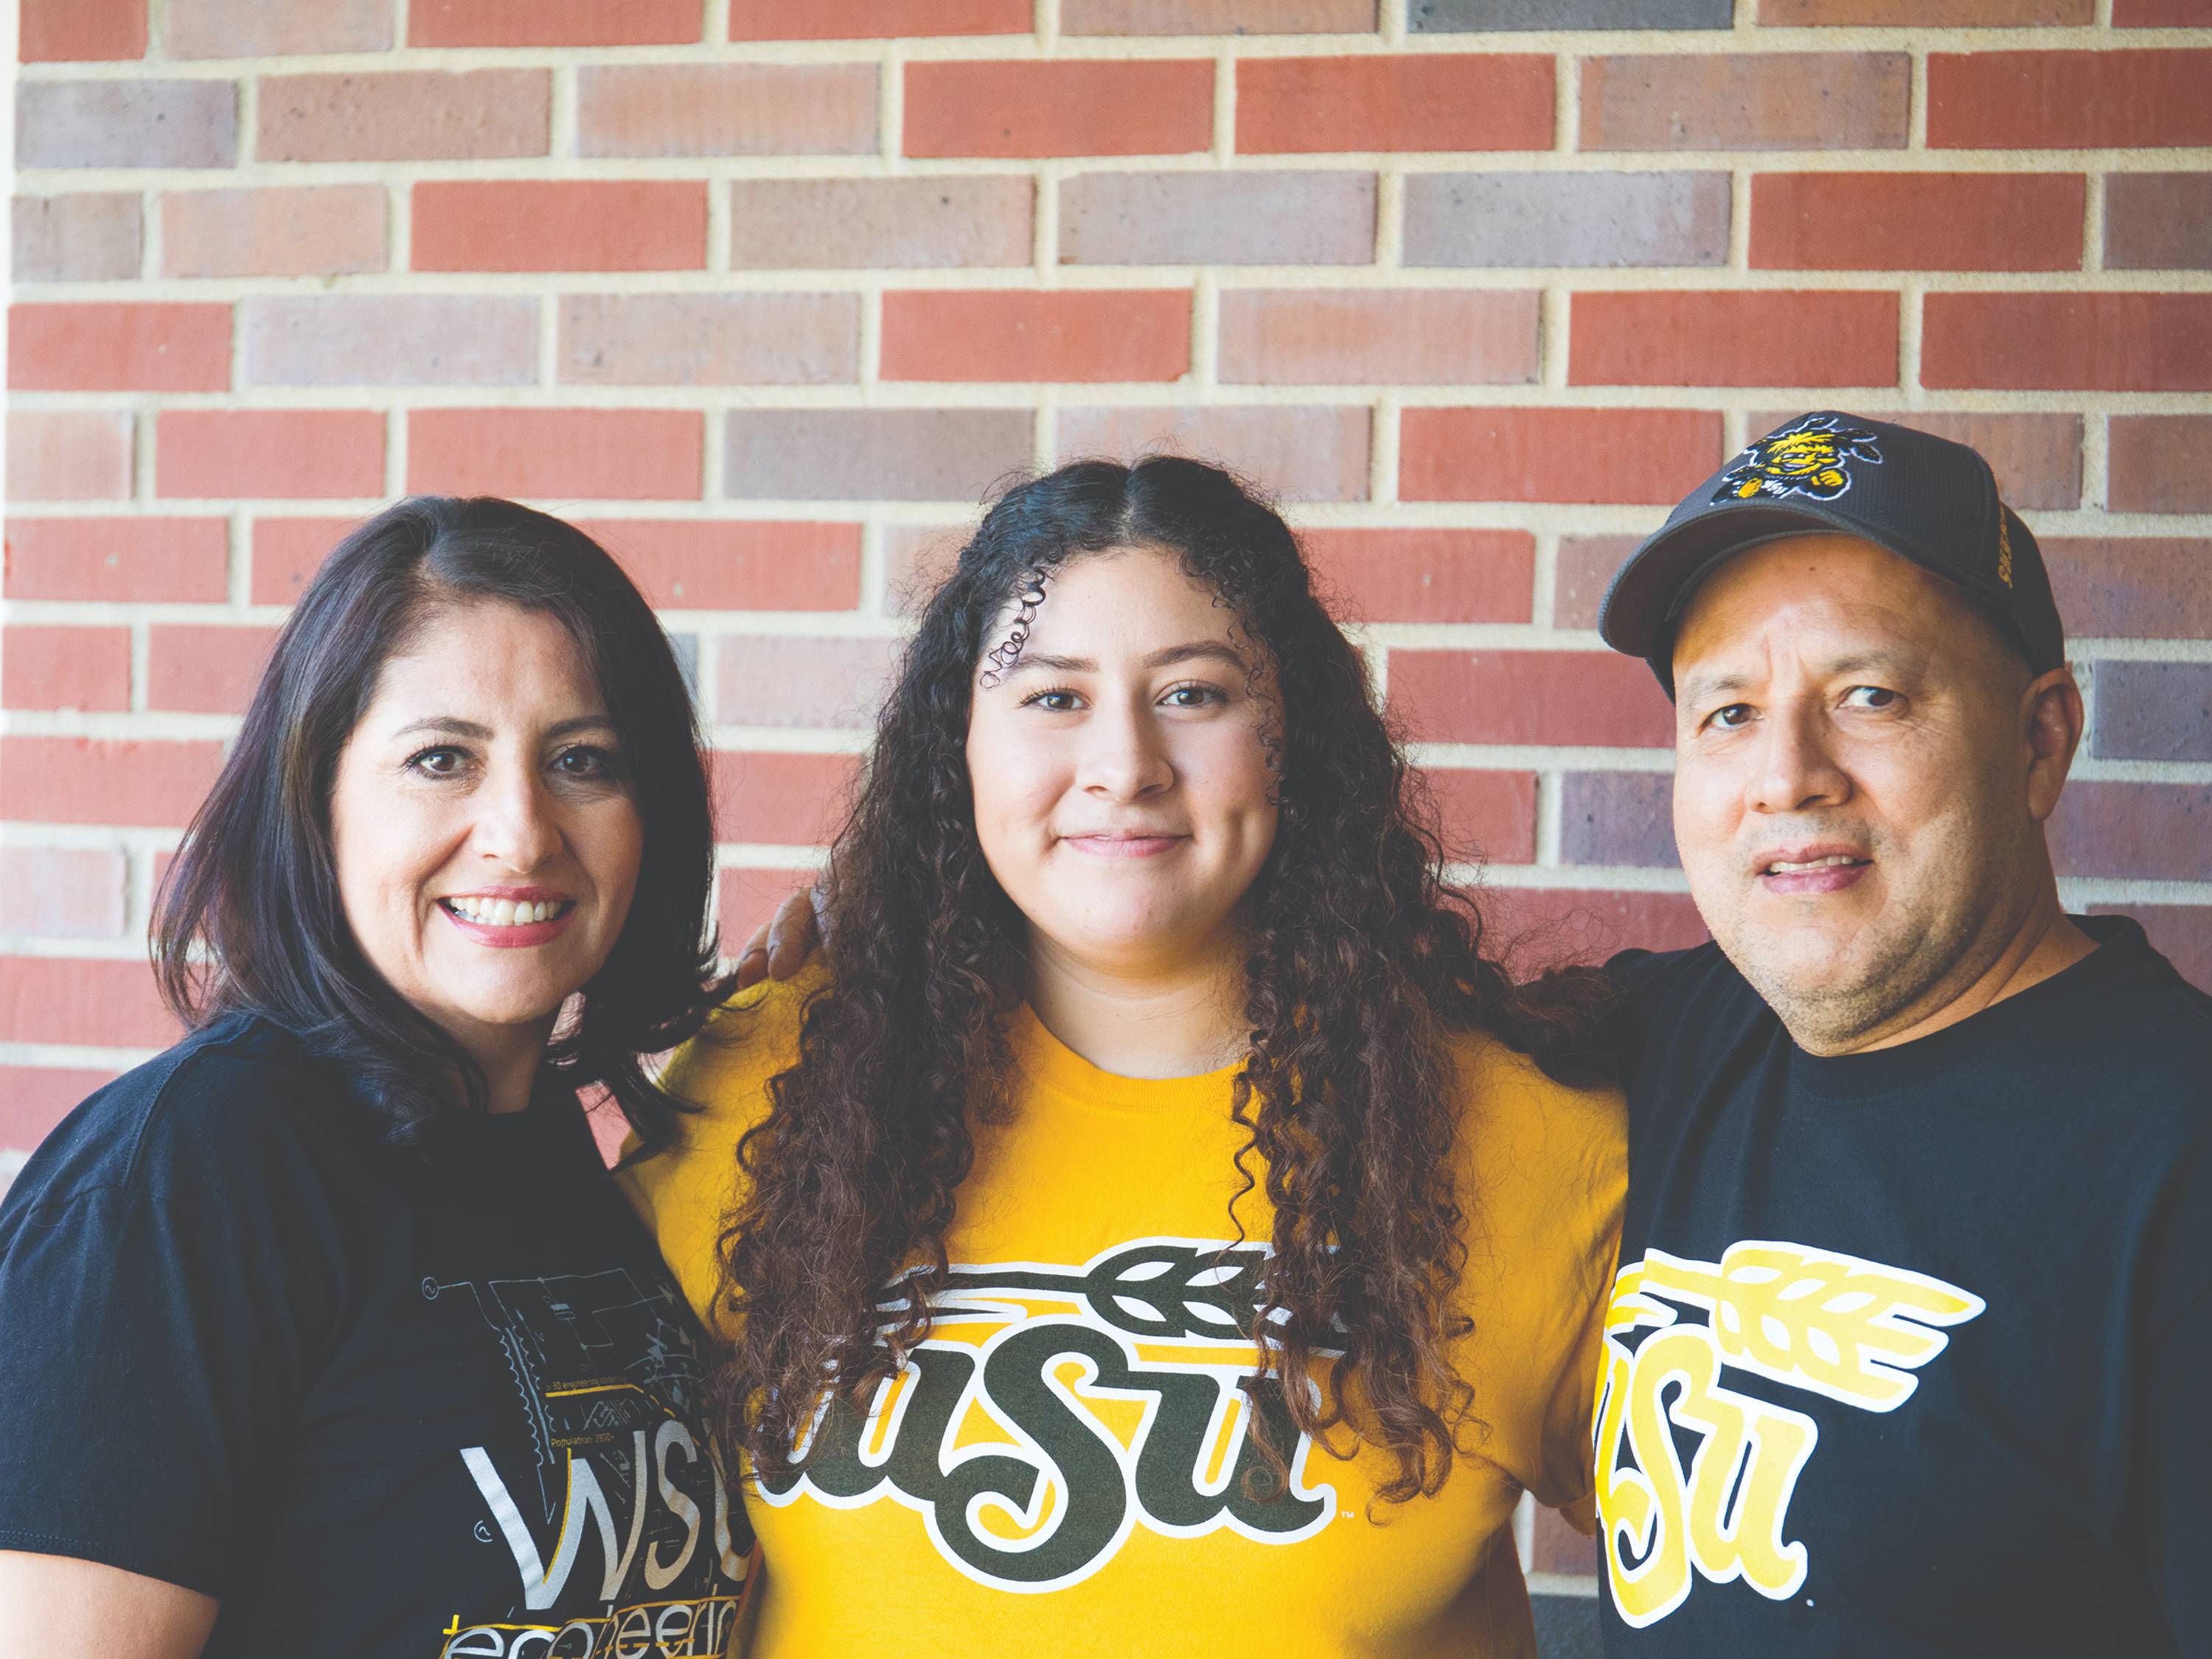 Two parents pose with their Shocker student